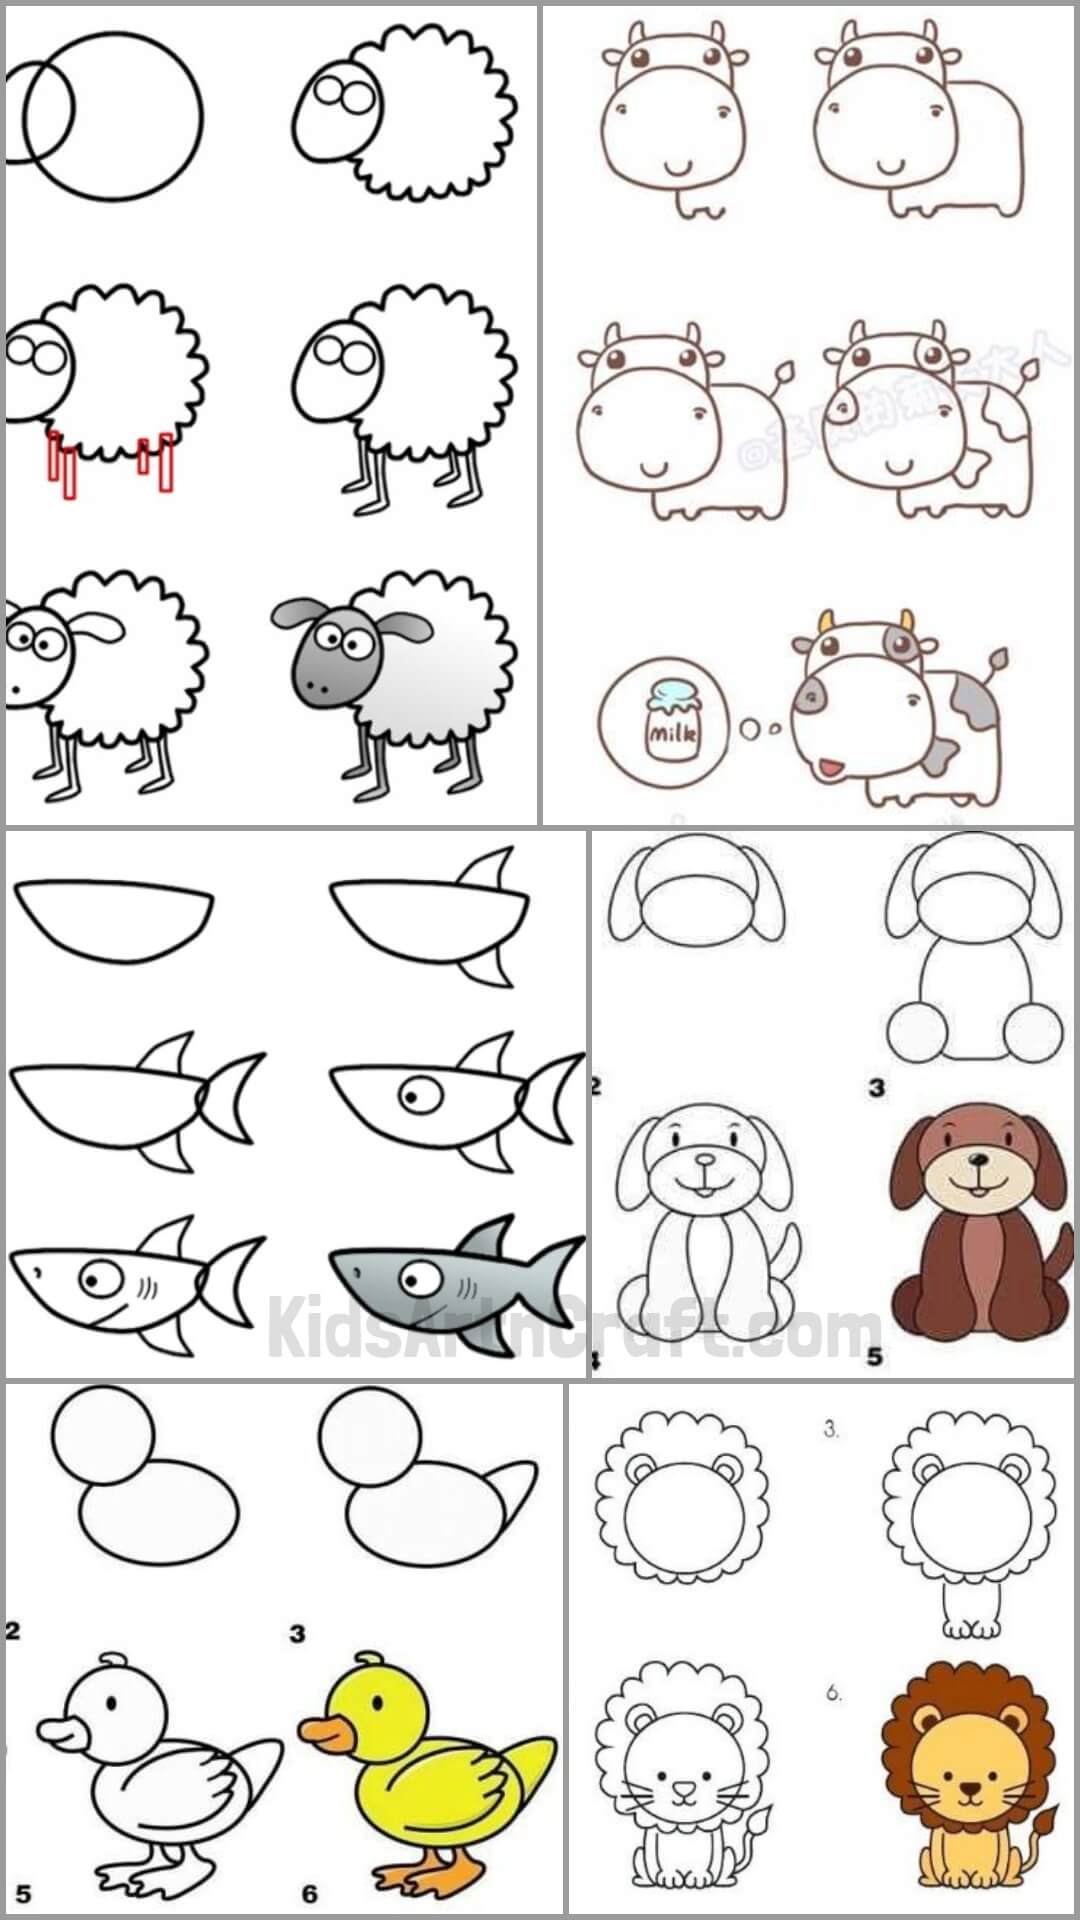 Easy Animals to Draw with Step by Step Tutorials